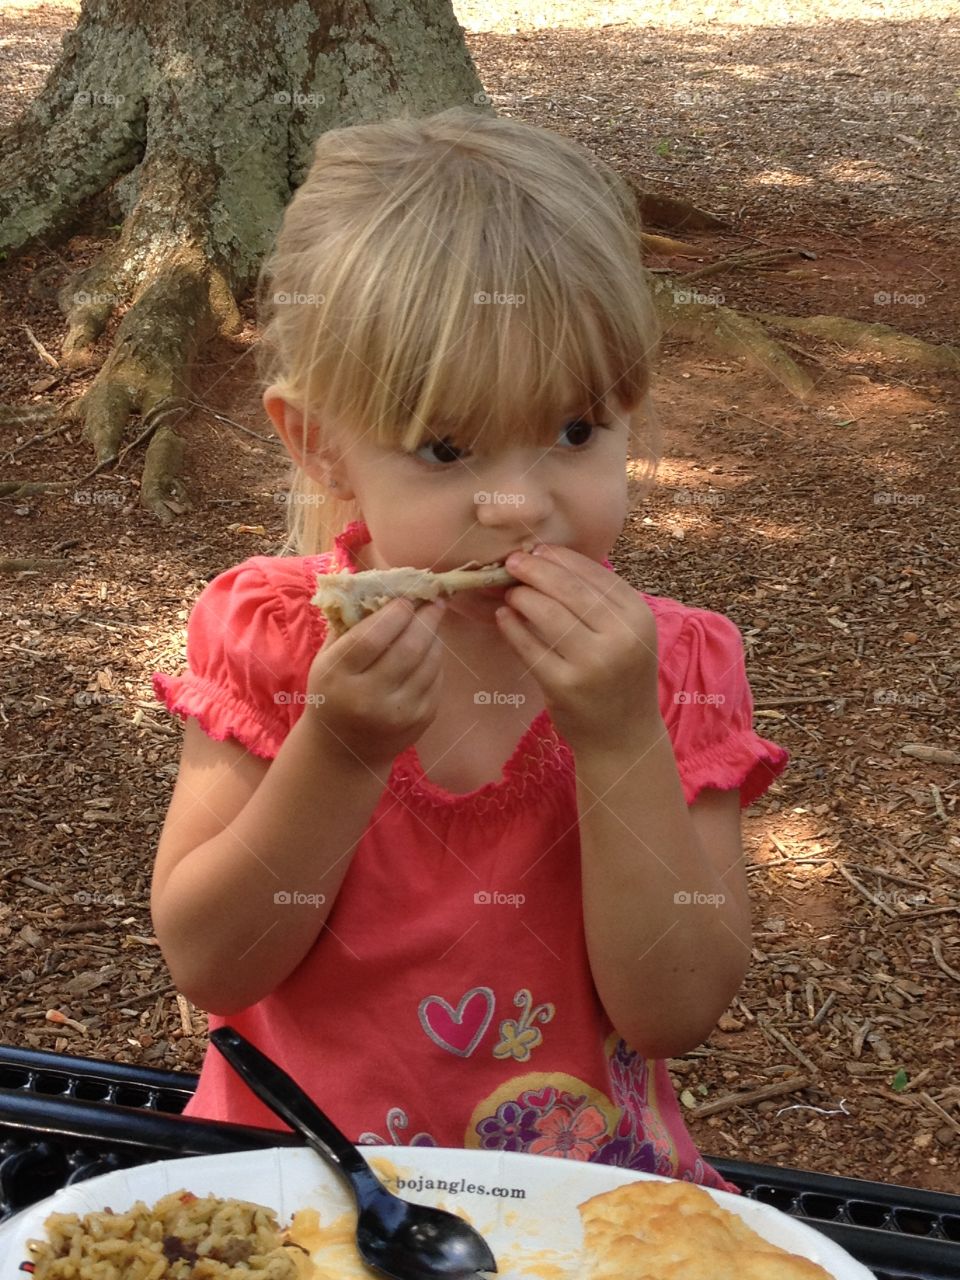 My daughter . Fun day in the park